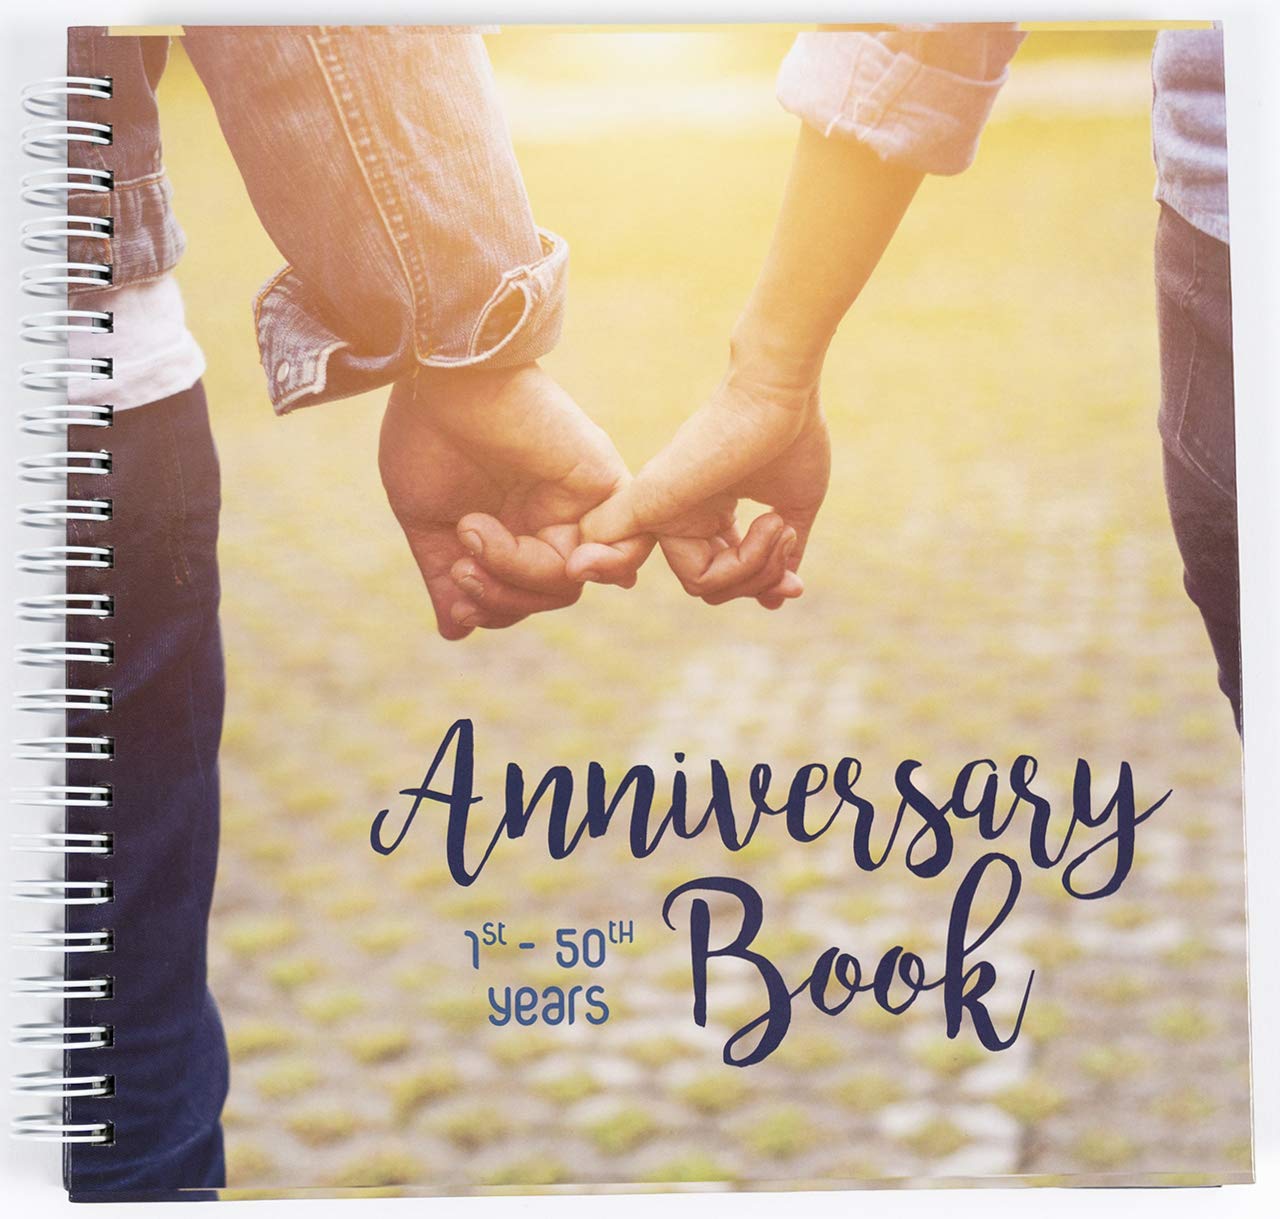  Why Don't We Anniversary Journal Wedding- Wedding Gift for  bride with a Book of firsts & years of advice for a healthy marriage-  Perfect for Wedding Registry Gifts, Cool bridal shower